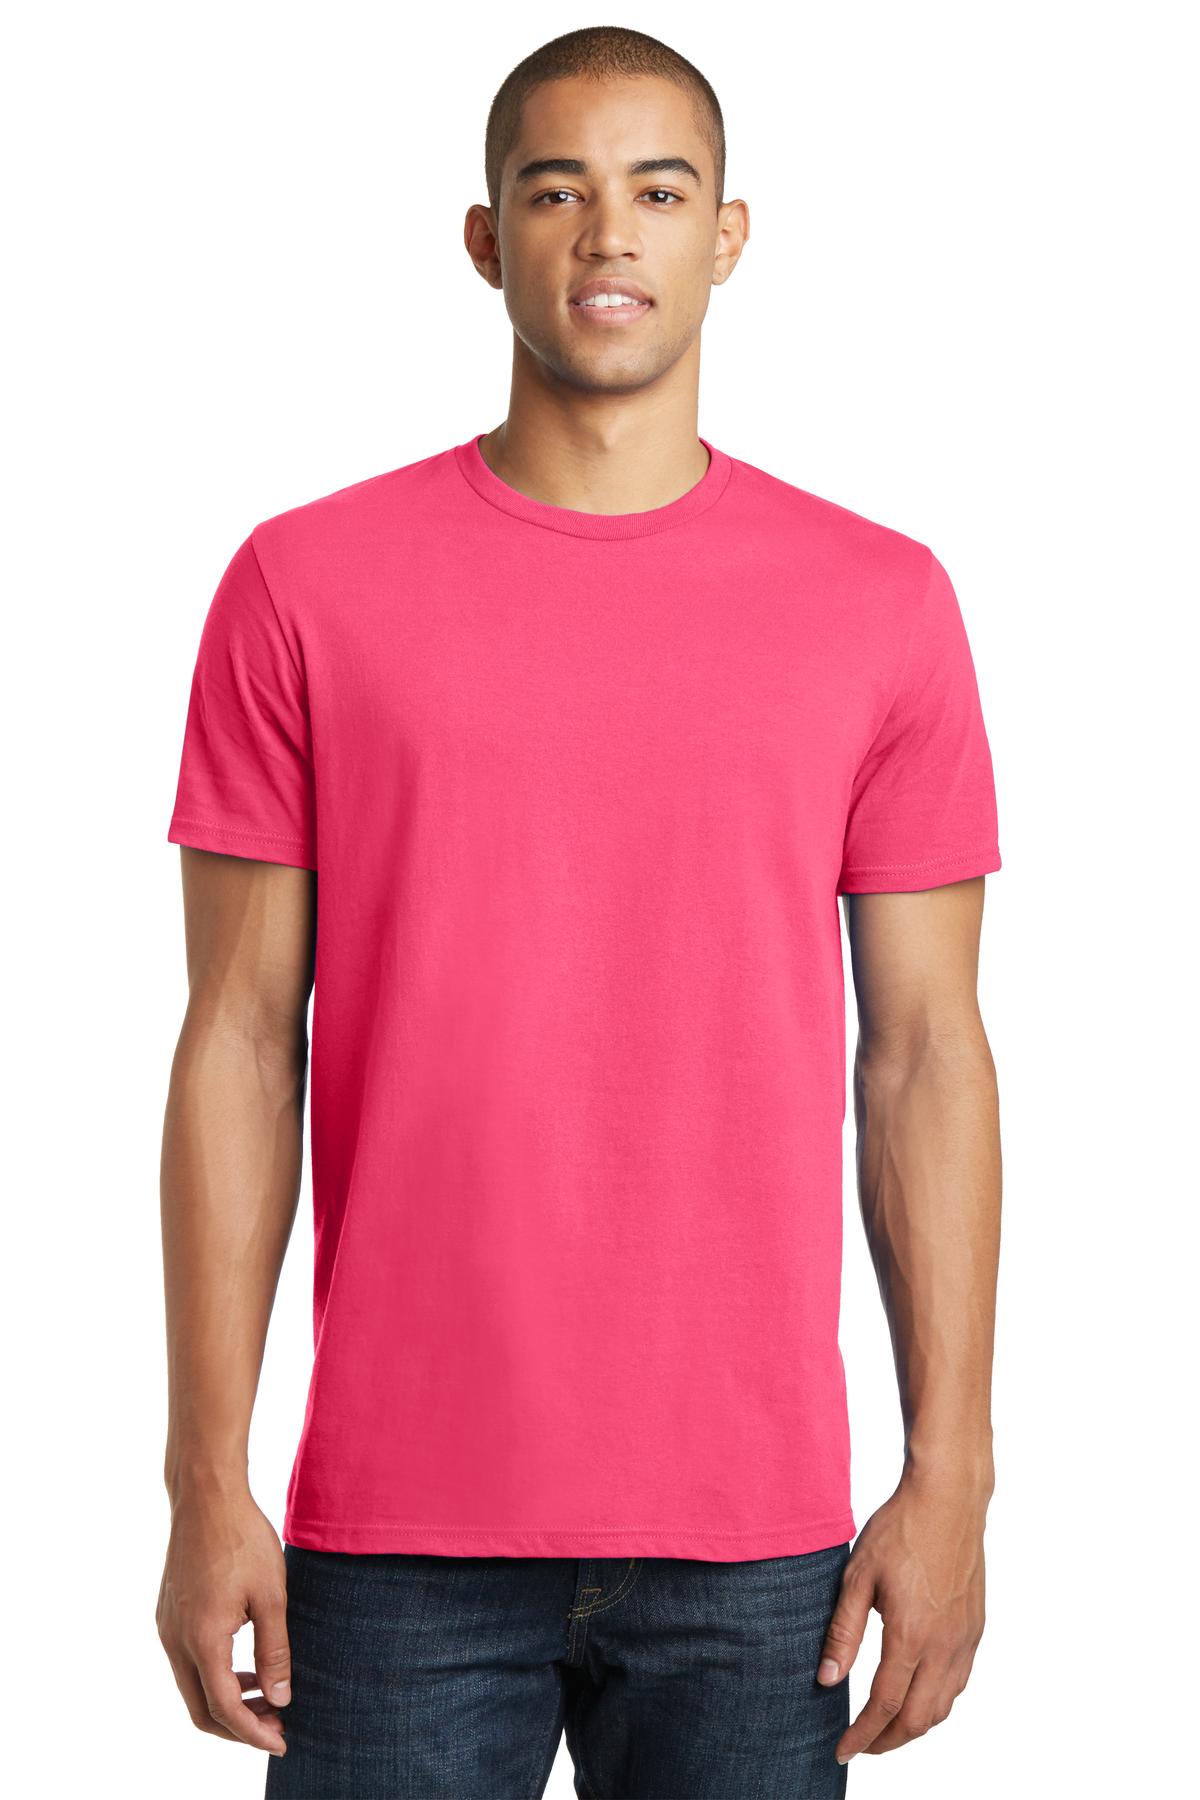 District Threads Young Mens Concert Tee Neon Pink 2XL. - image 1 of 1